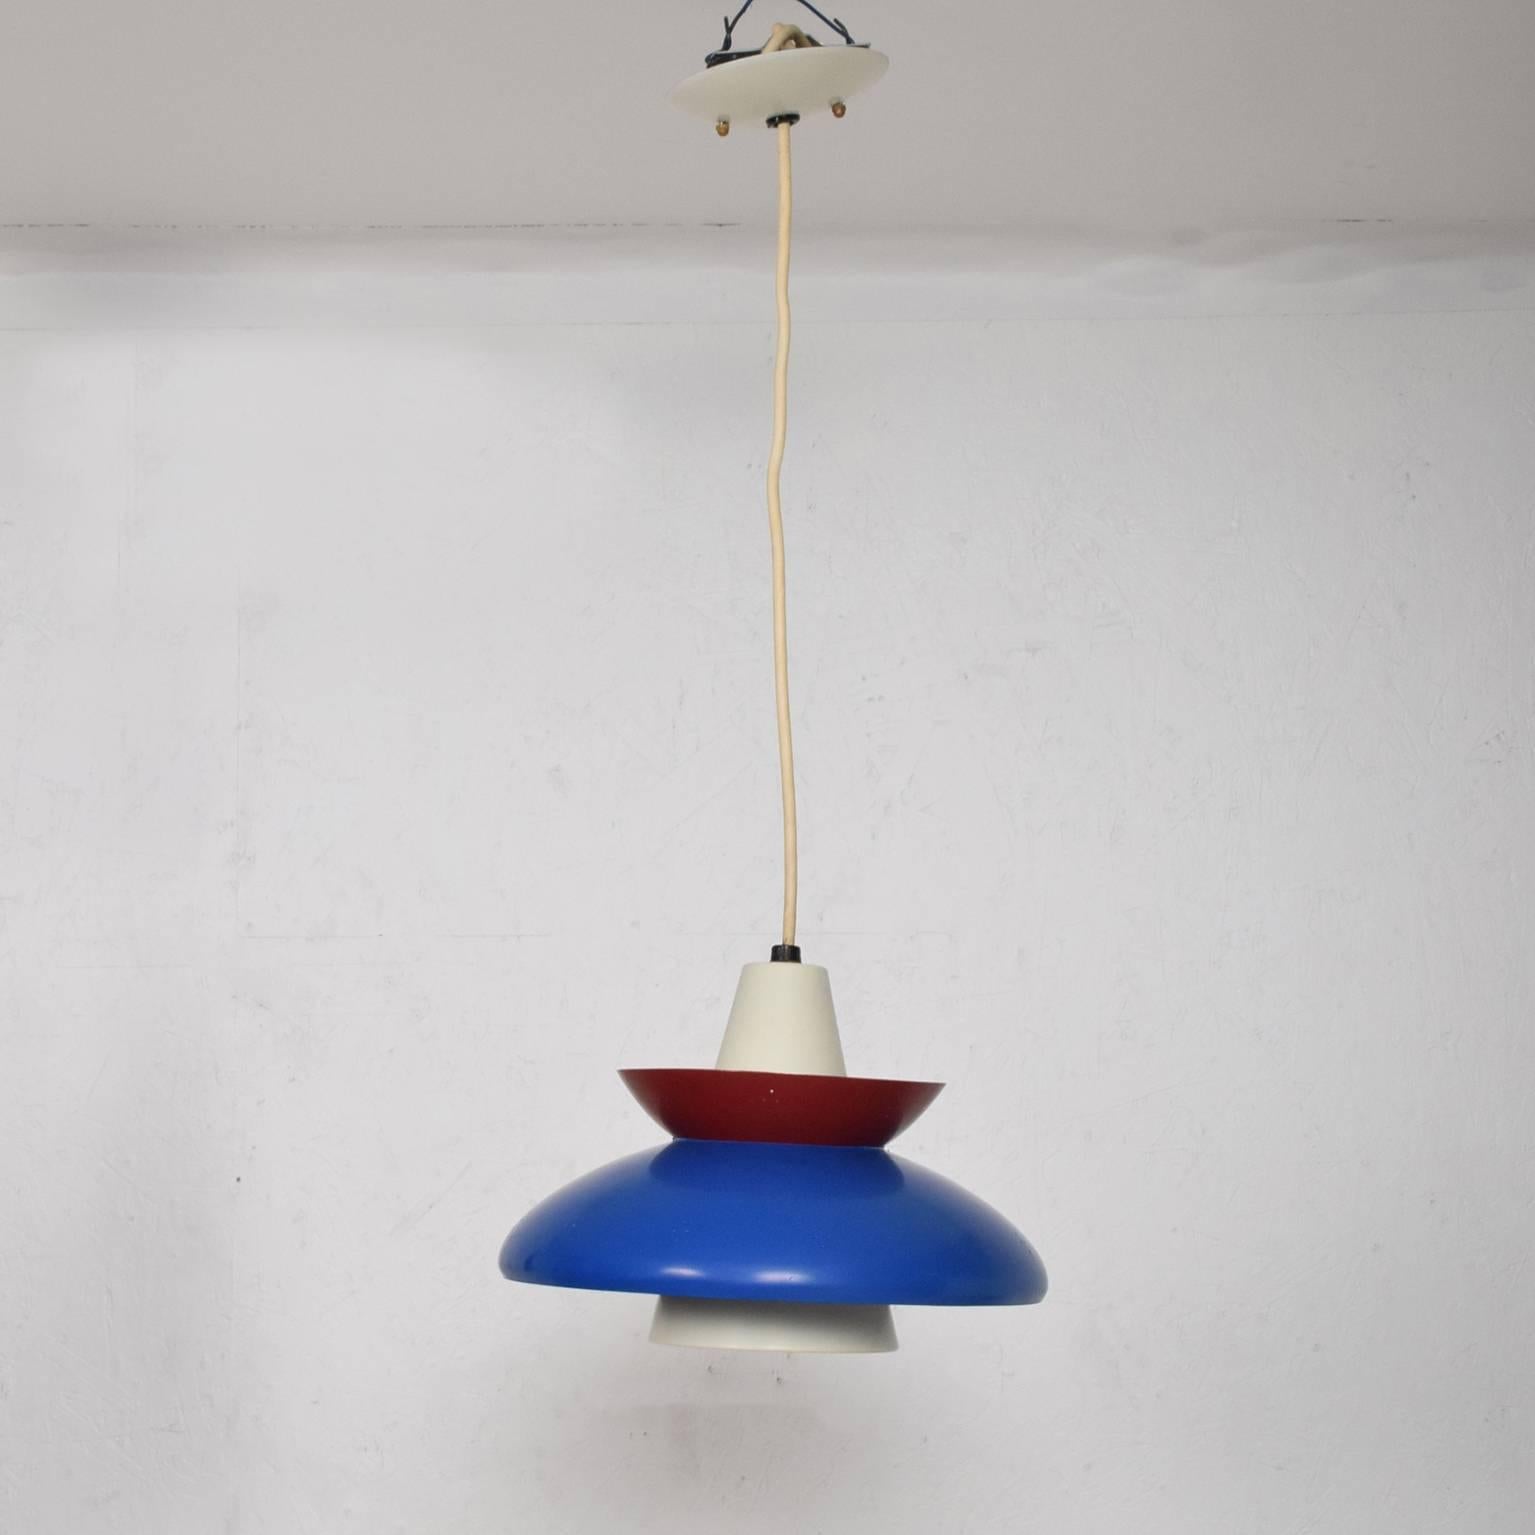 For your consideration, an American Mid-Century Modern pendant light sculptural shape.
Aluminum spoon shades painted in blue, red and off white color.
Made in the The USA circa the late 1950s.
Dimensions: 9